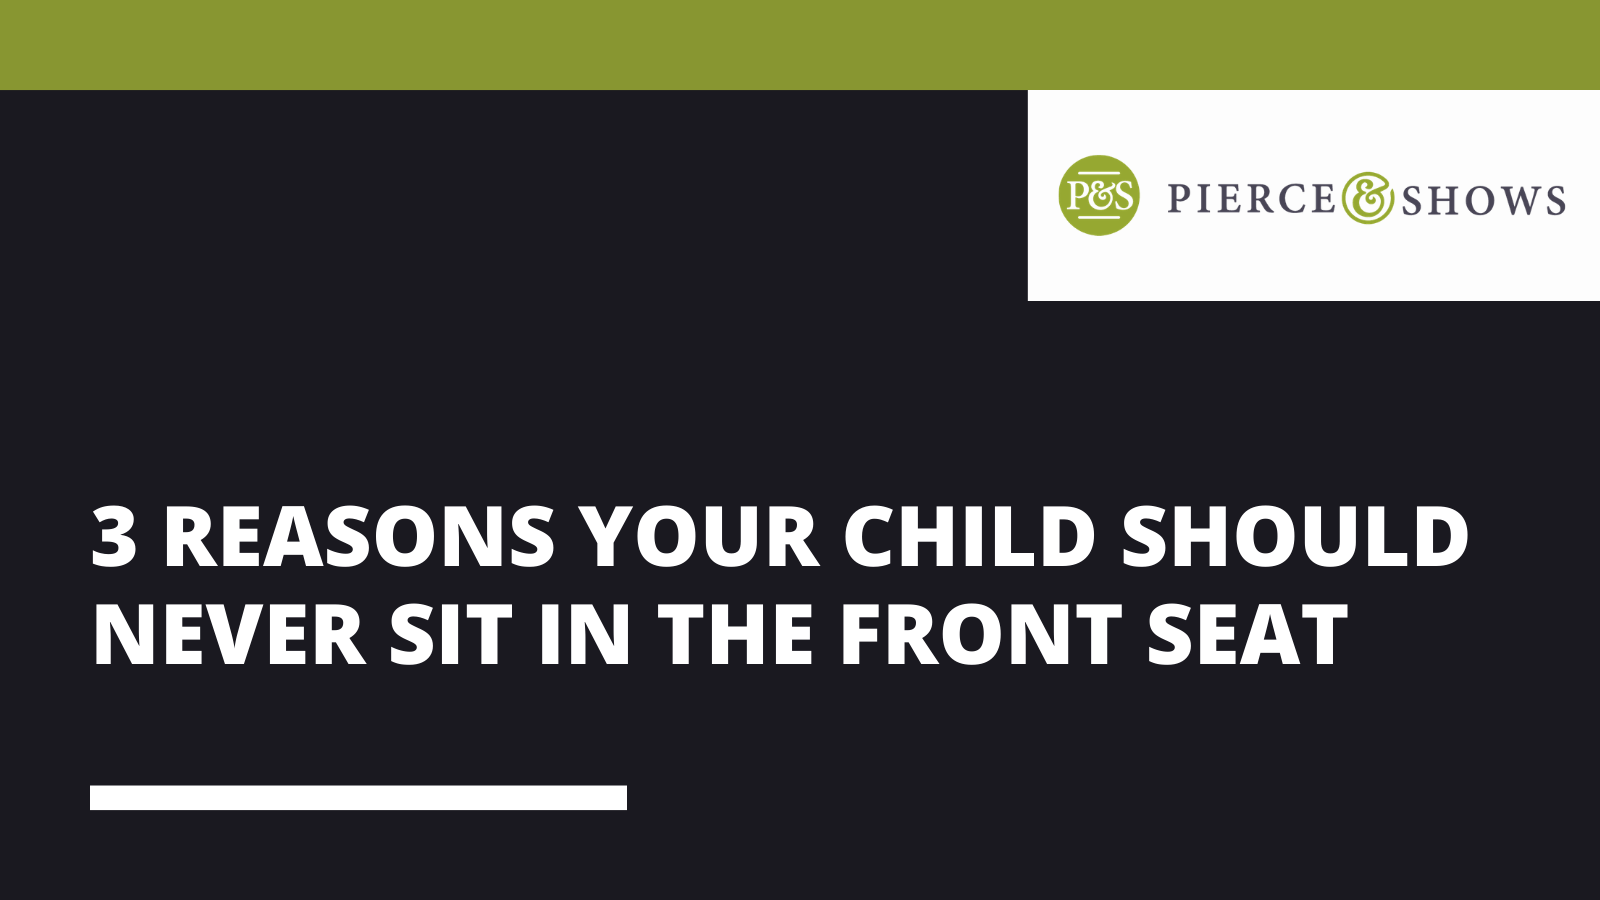 3 reasons your child should never sit in the front seat - Pierce & Shows injury attorney Baton Rouge, Louisiana